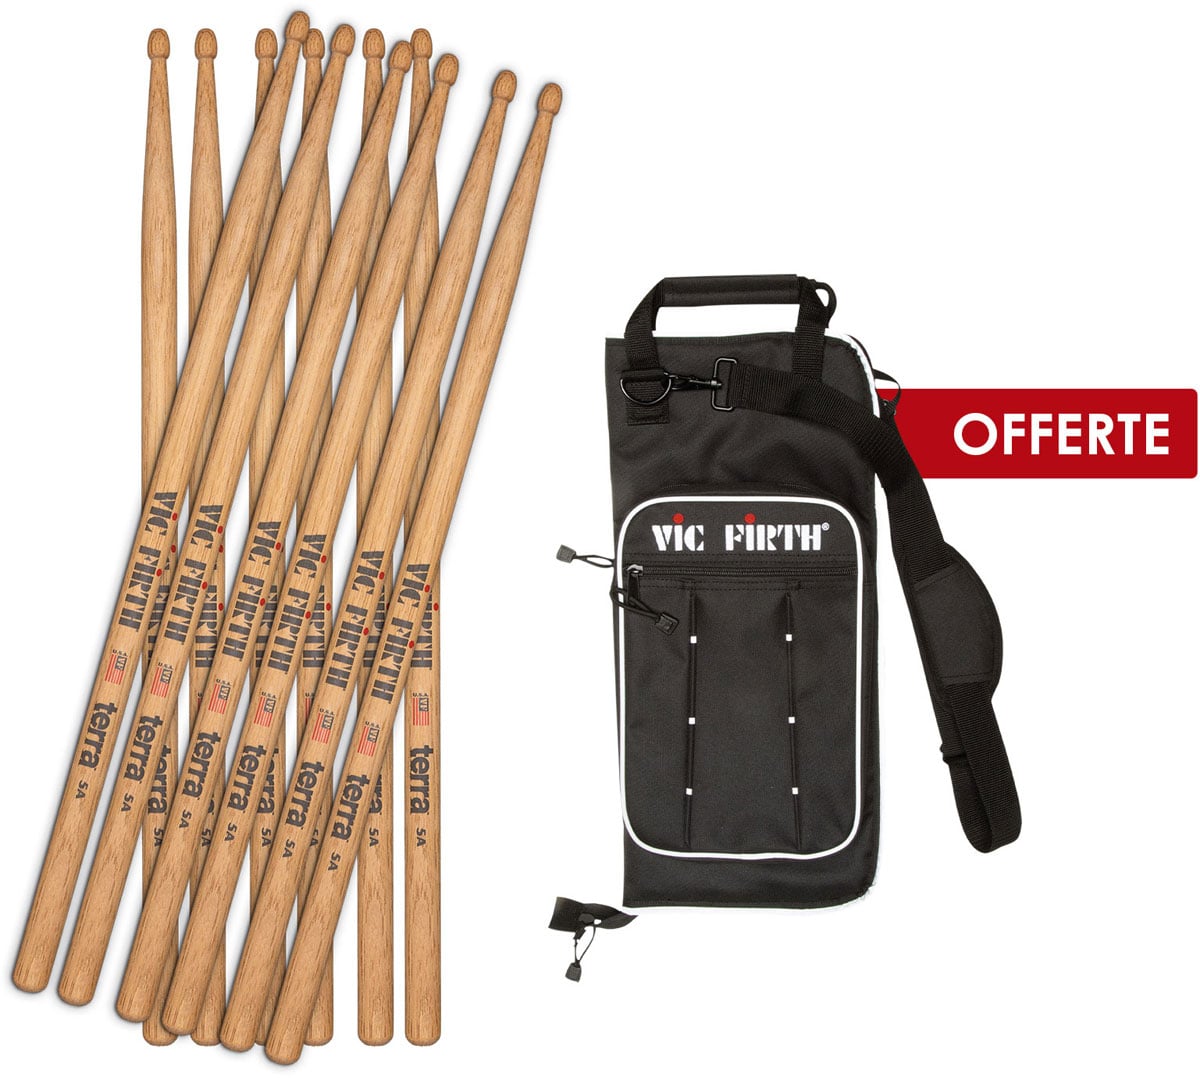 VIC FIRTH PACK 12X 5A TERRA - AMERICAN CLASSIC HICKORY + HOUSSE OFFERTE